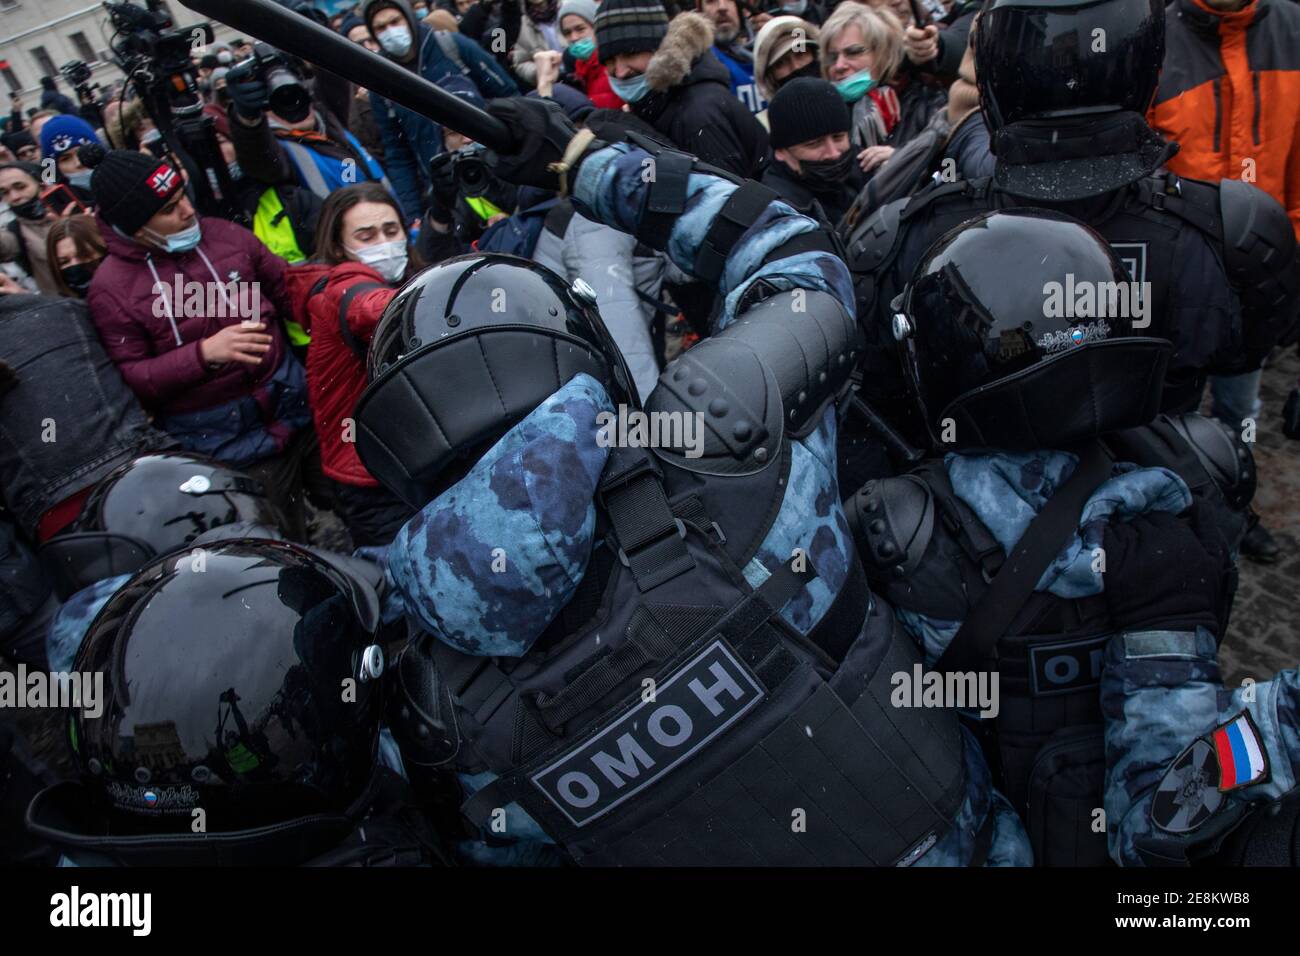 Moscow, Russia. 31st of January, 2021 Protesters oppose riot police during a rally in support of jailed opposition leader Alexei Navalny on Komsomolskaya square in Moscow, Russia. Kremlin critic Alexei Navalny was detained on January 17 upon returning to the country from Germany, where he was recovering from poisoning Stock Photo